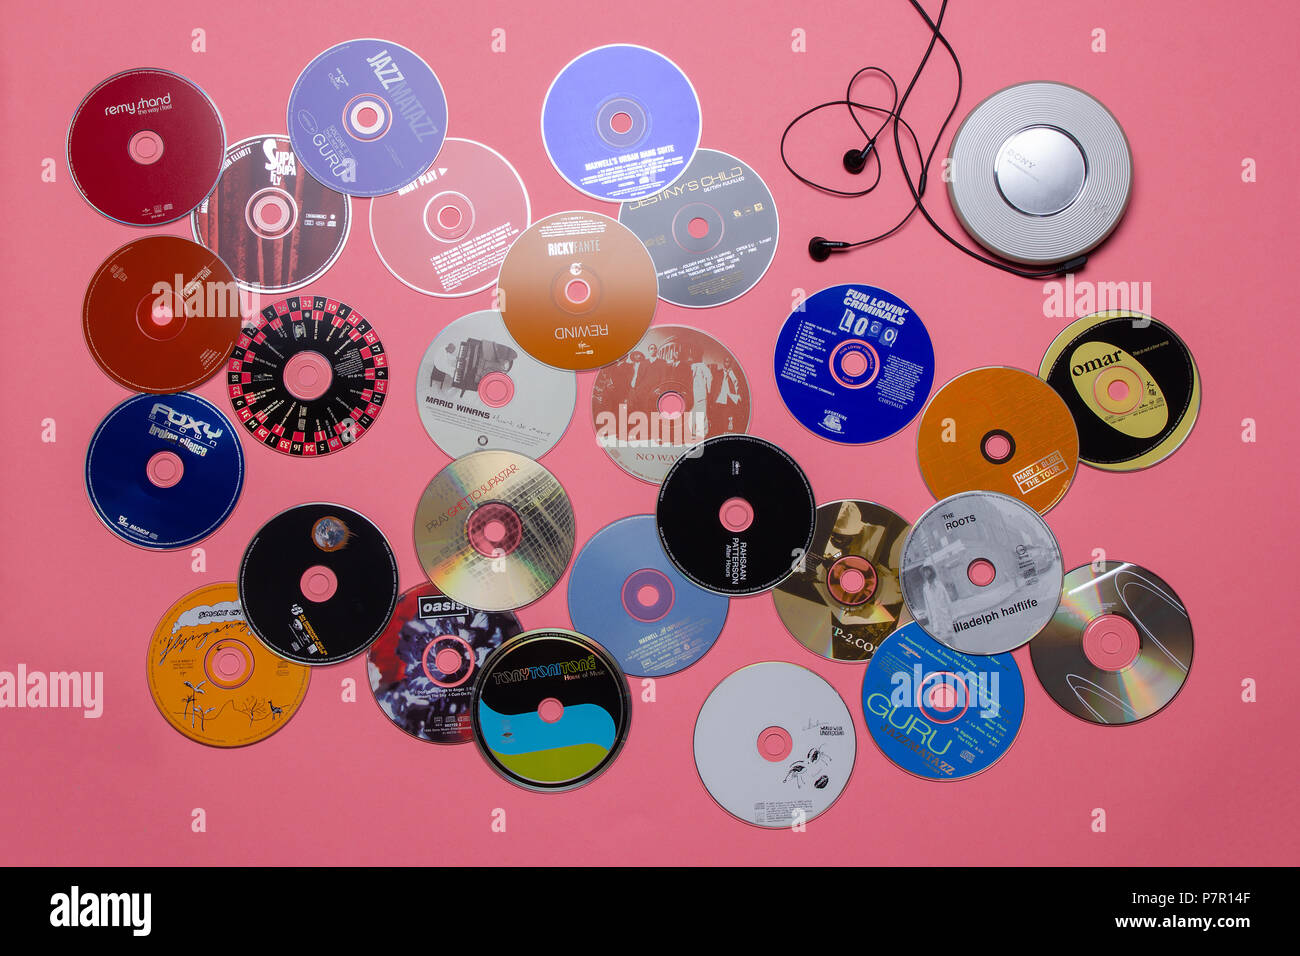 a fantastic top view of a 90's sony diskman and audio cd's on a pink background Stock Photo